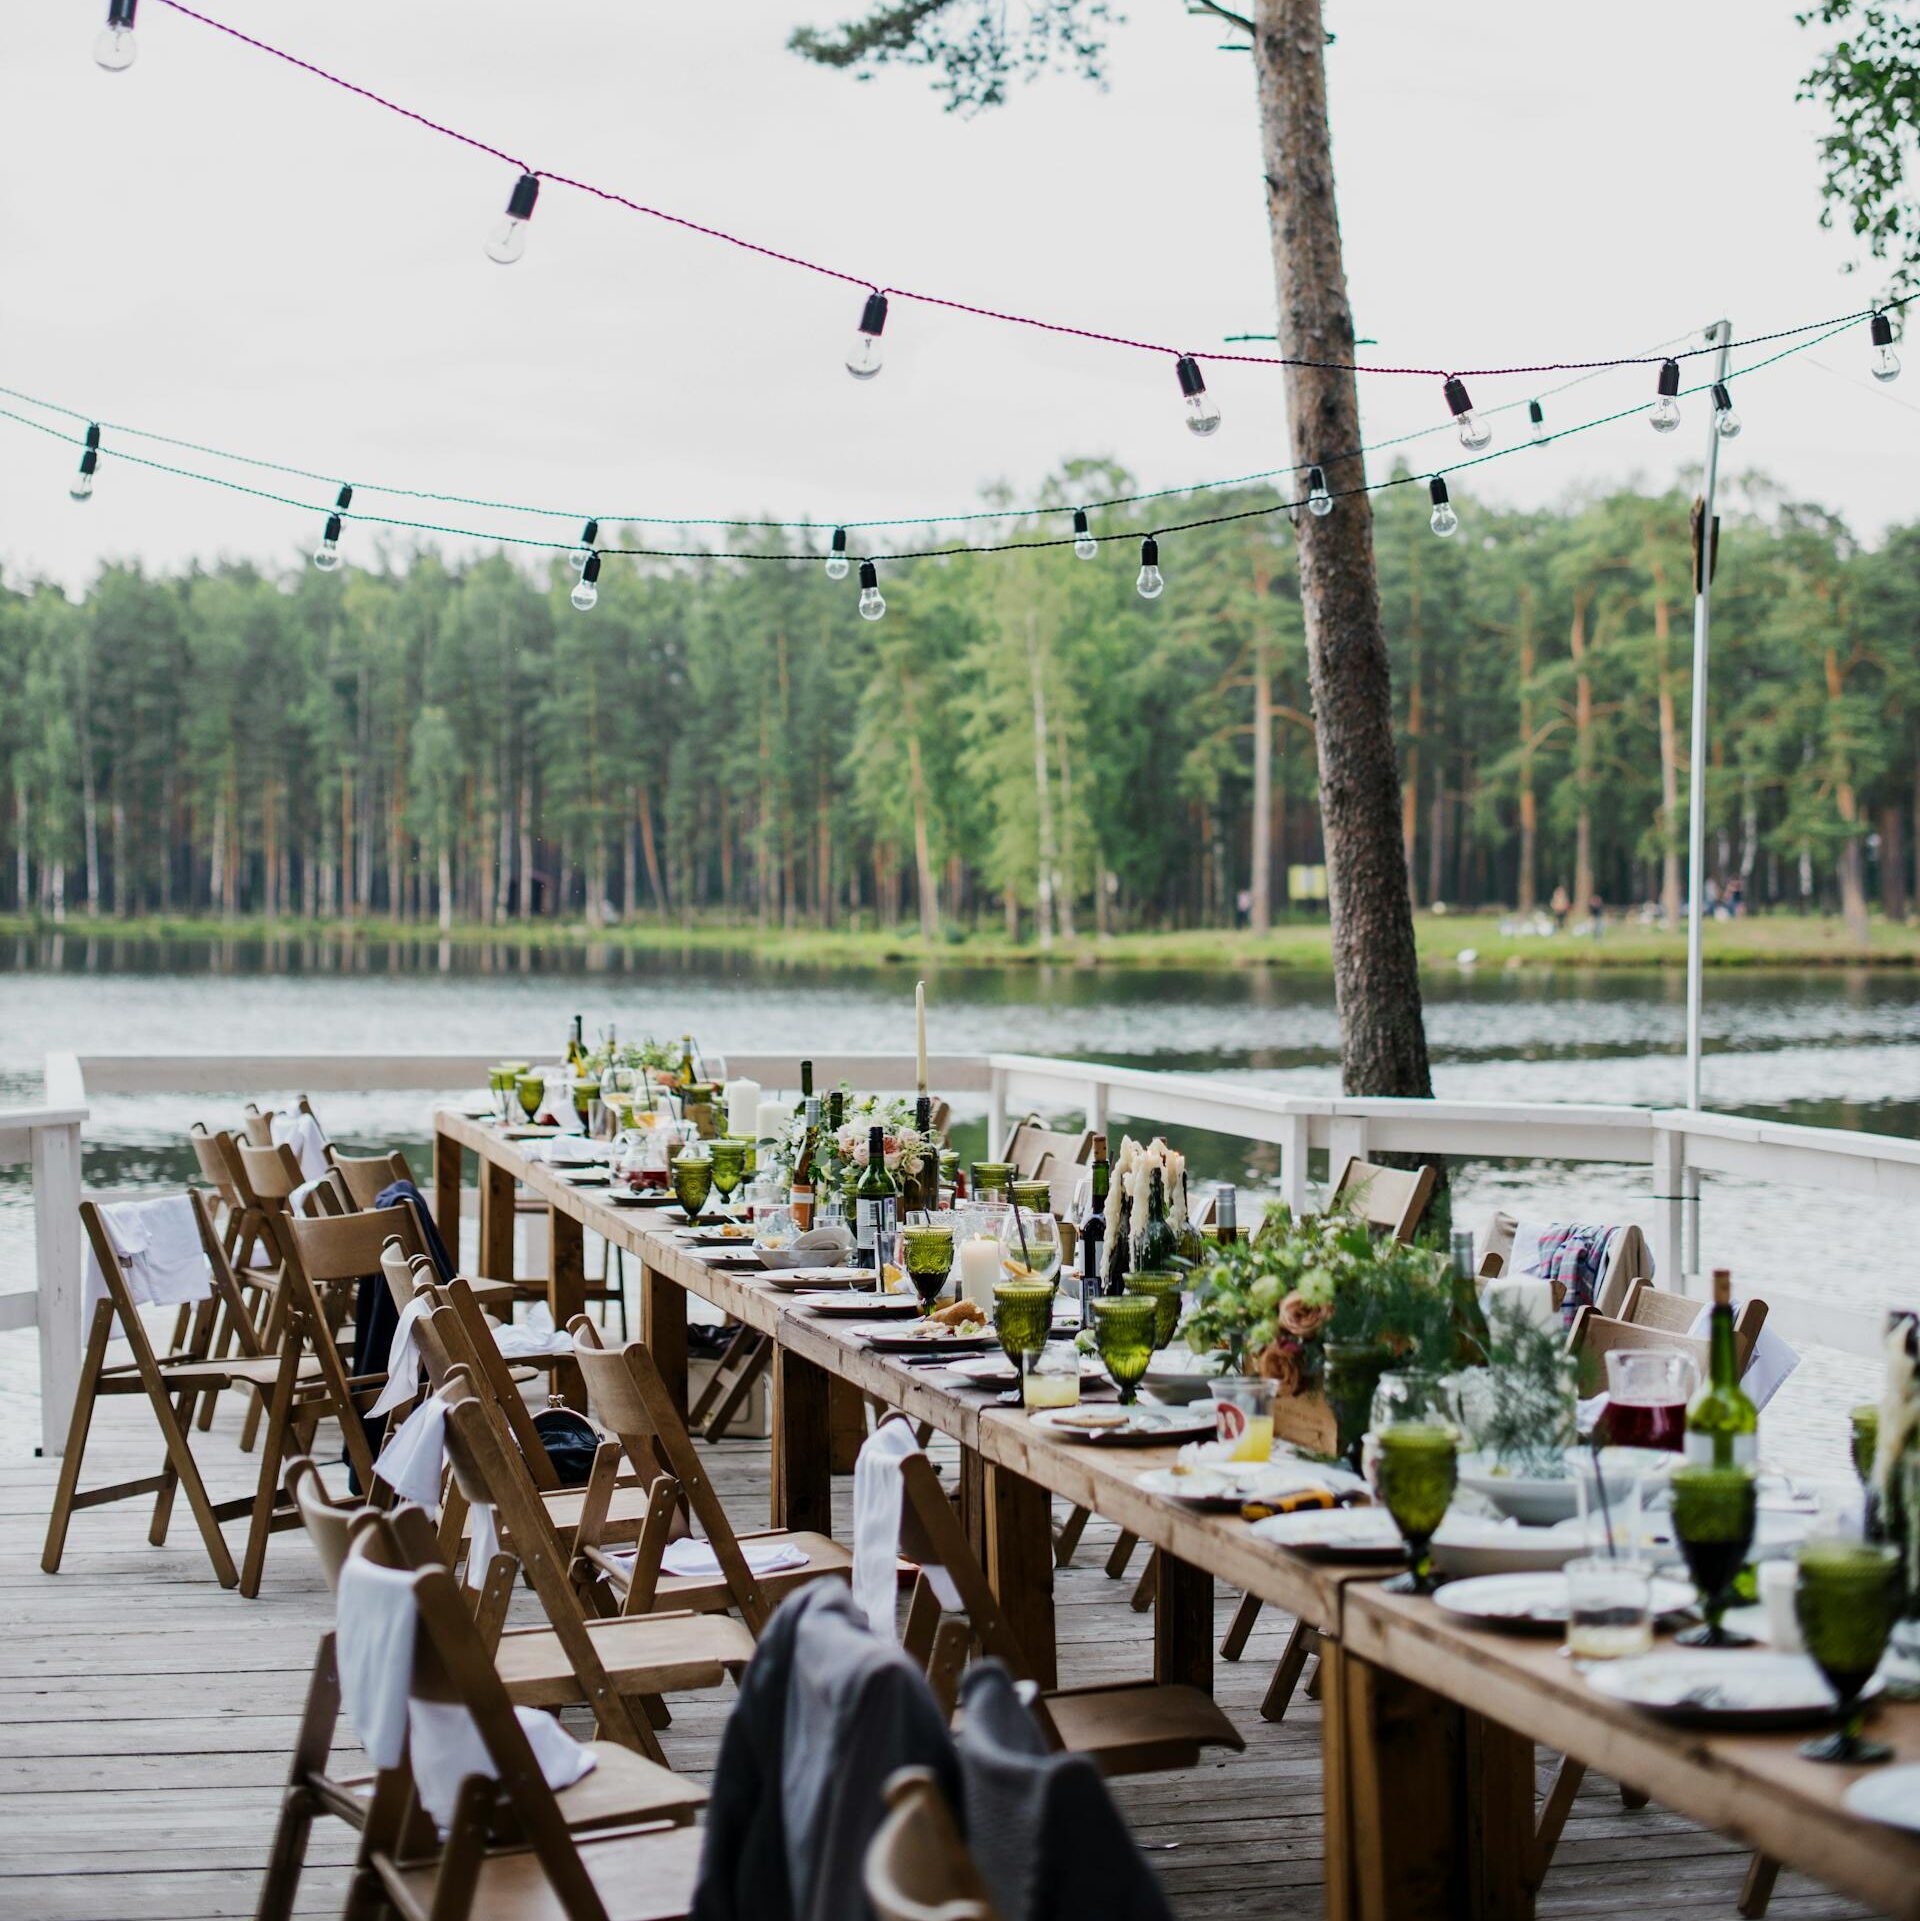 An arranged place for a party near a lake